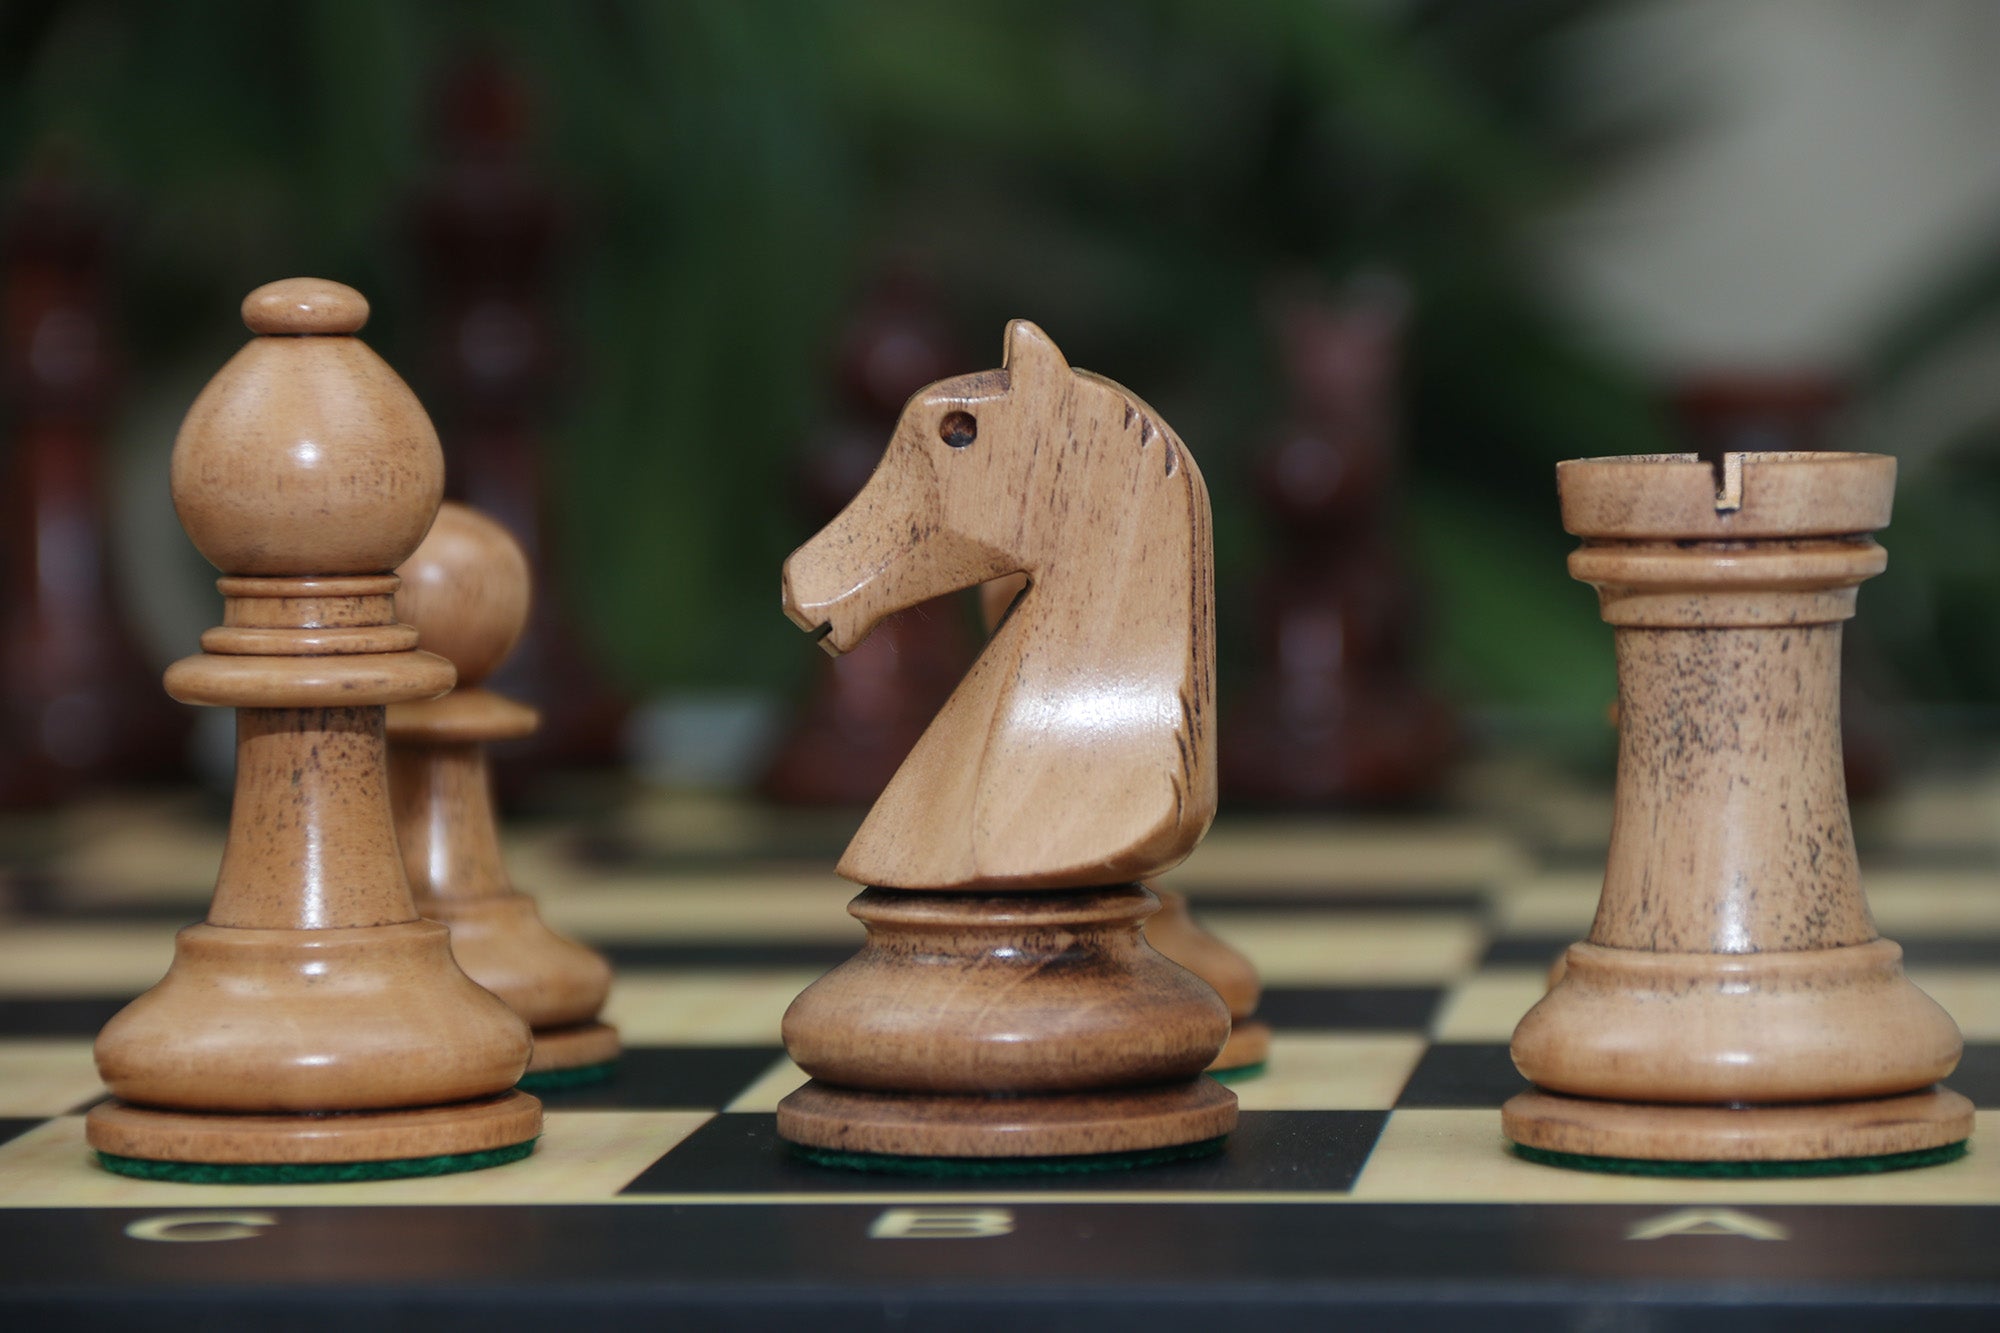 Henri Chavet Reproduced Chess Set in Distressed and Mahogany Stained Boxwood- 3.75" King Height